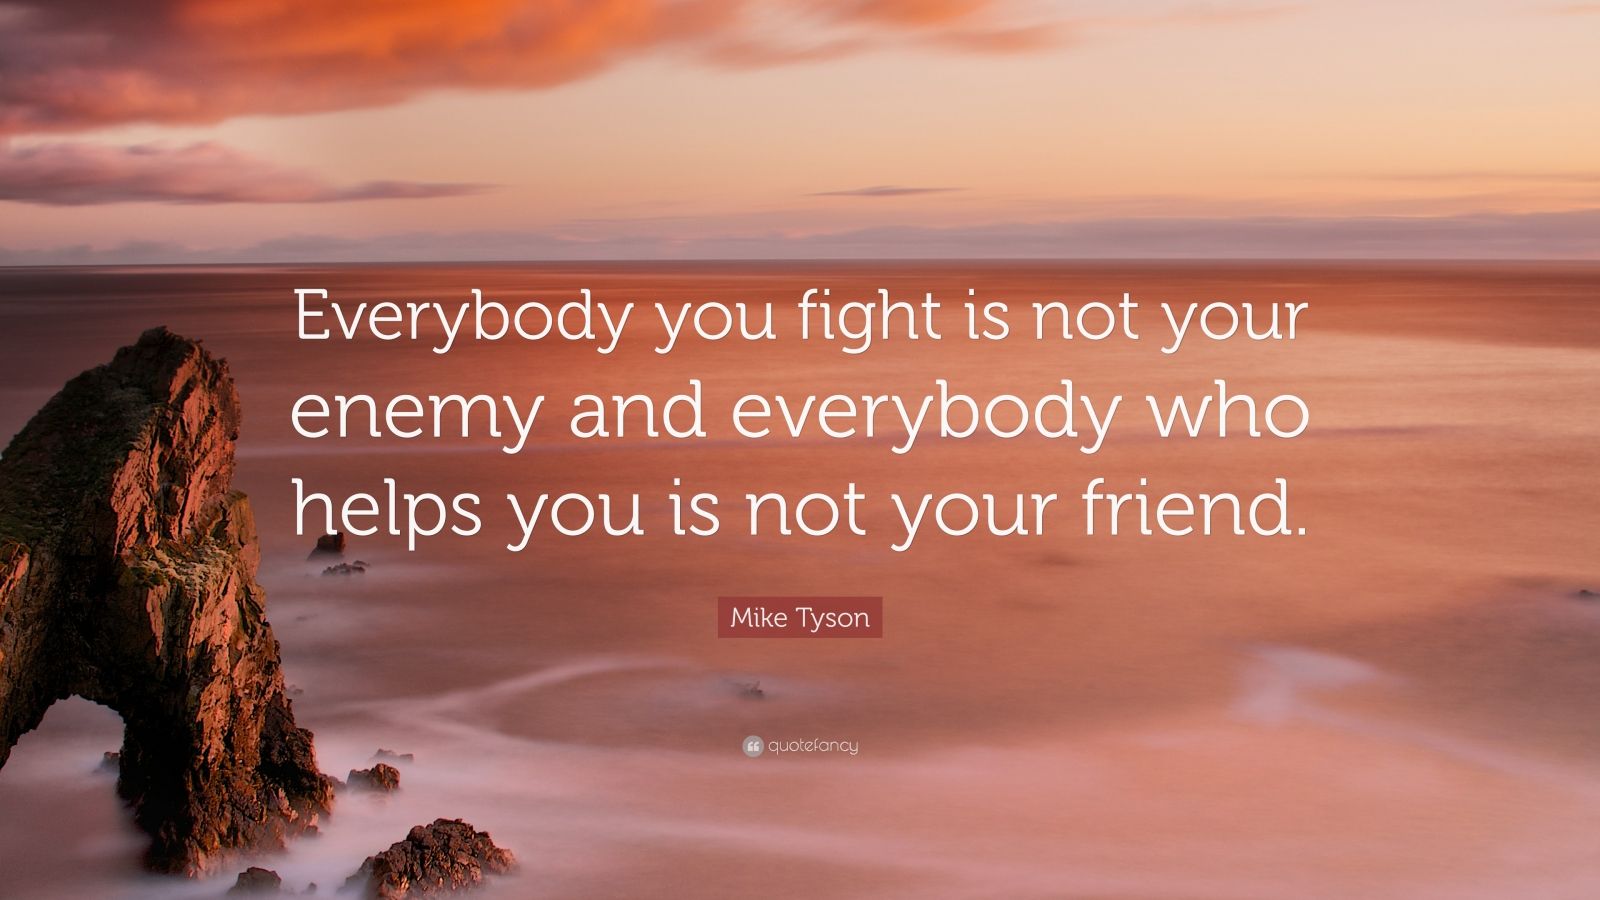 Mike Tyson Quote: “Everybody you fight is not your enemy and everybody